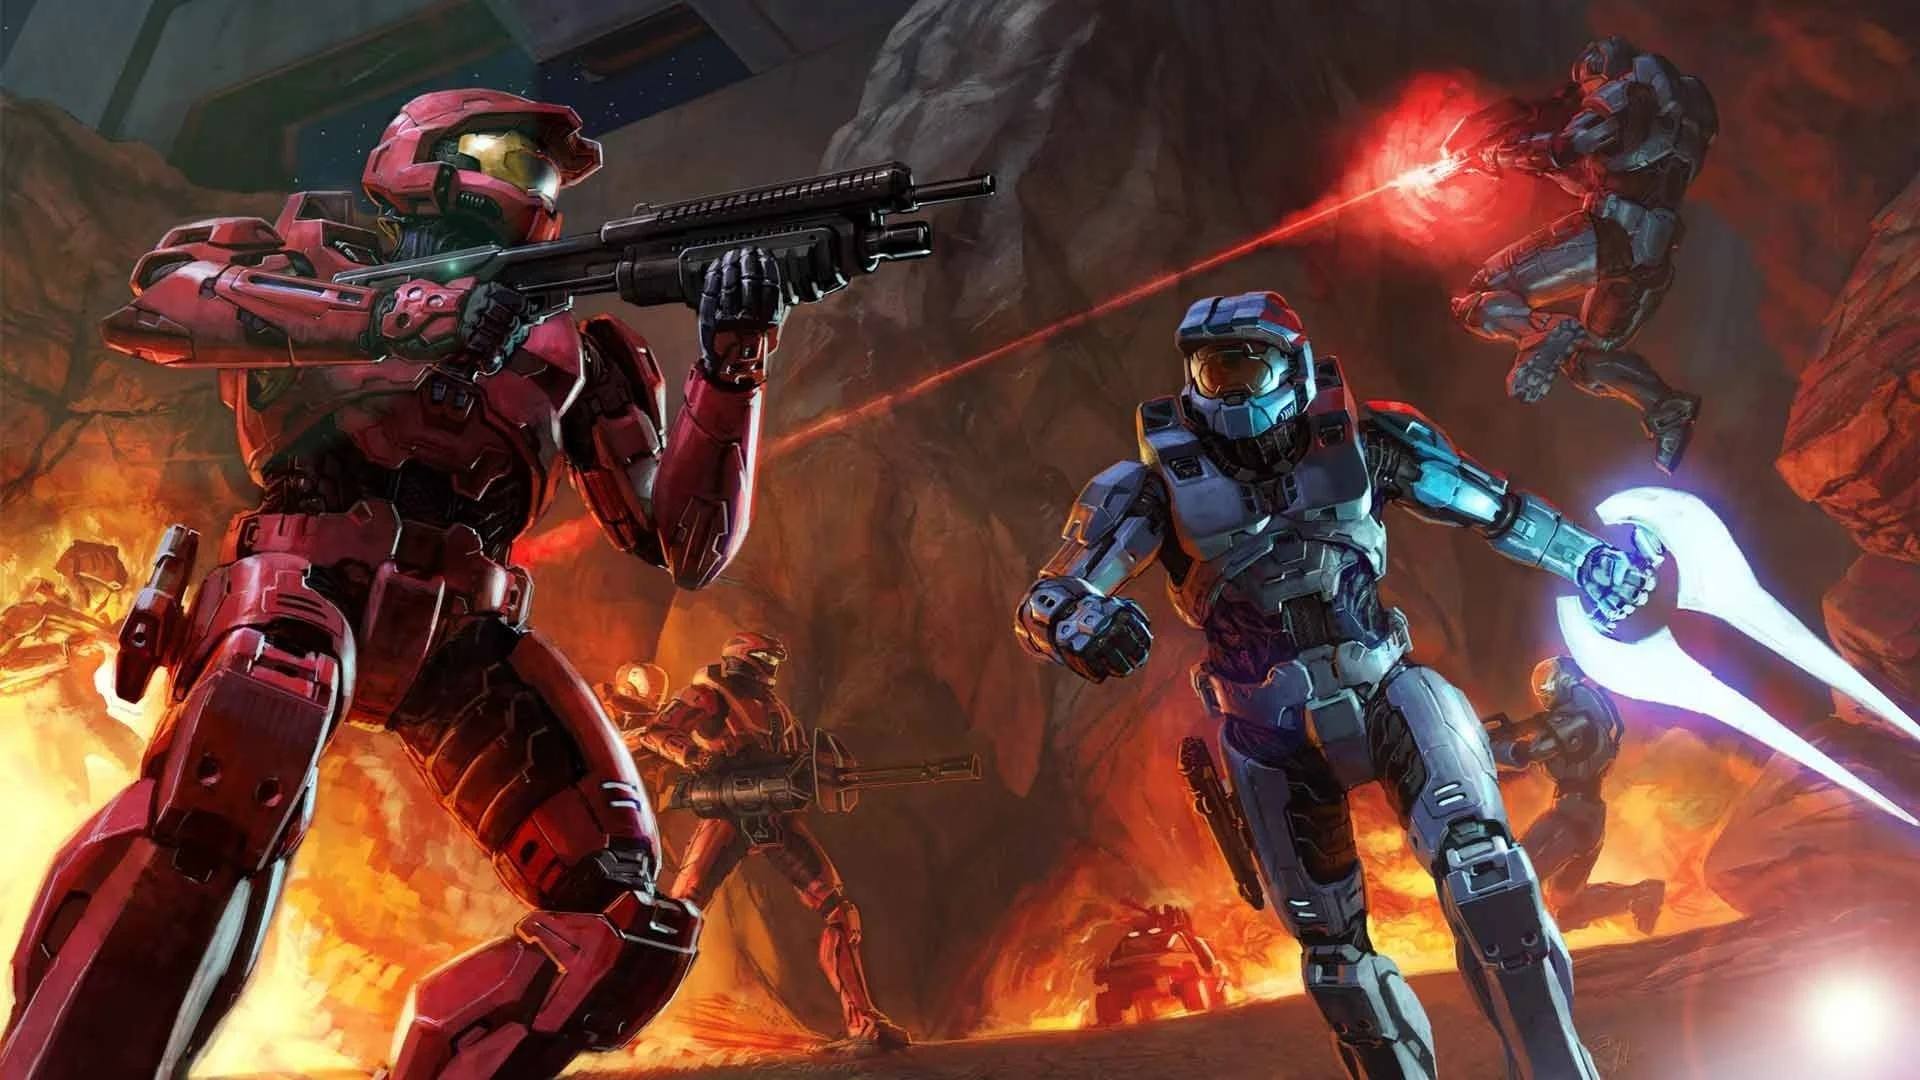 Video Game – Halo 2 Space Battle Wallpaper